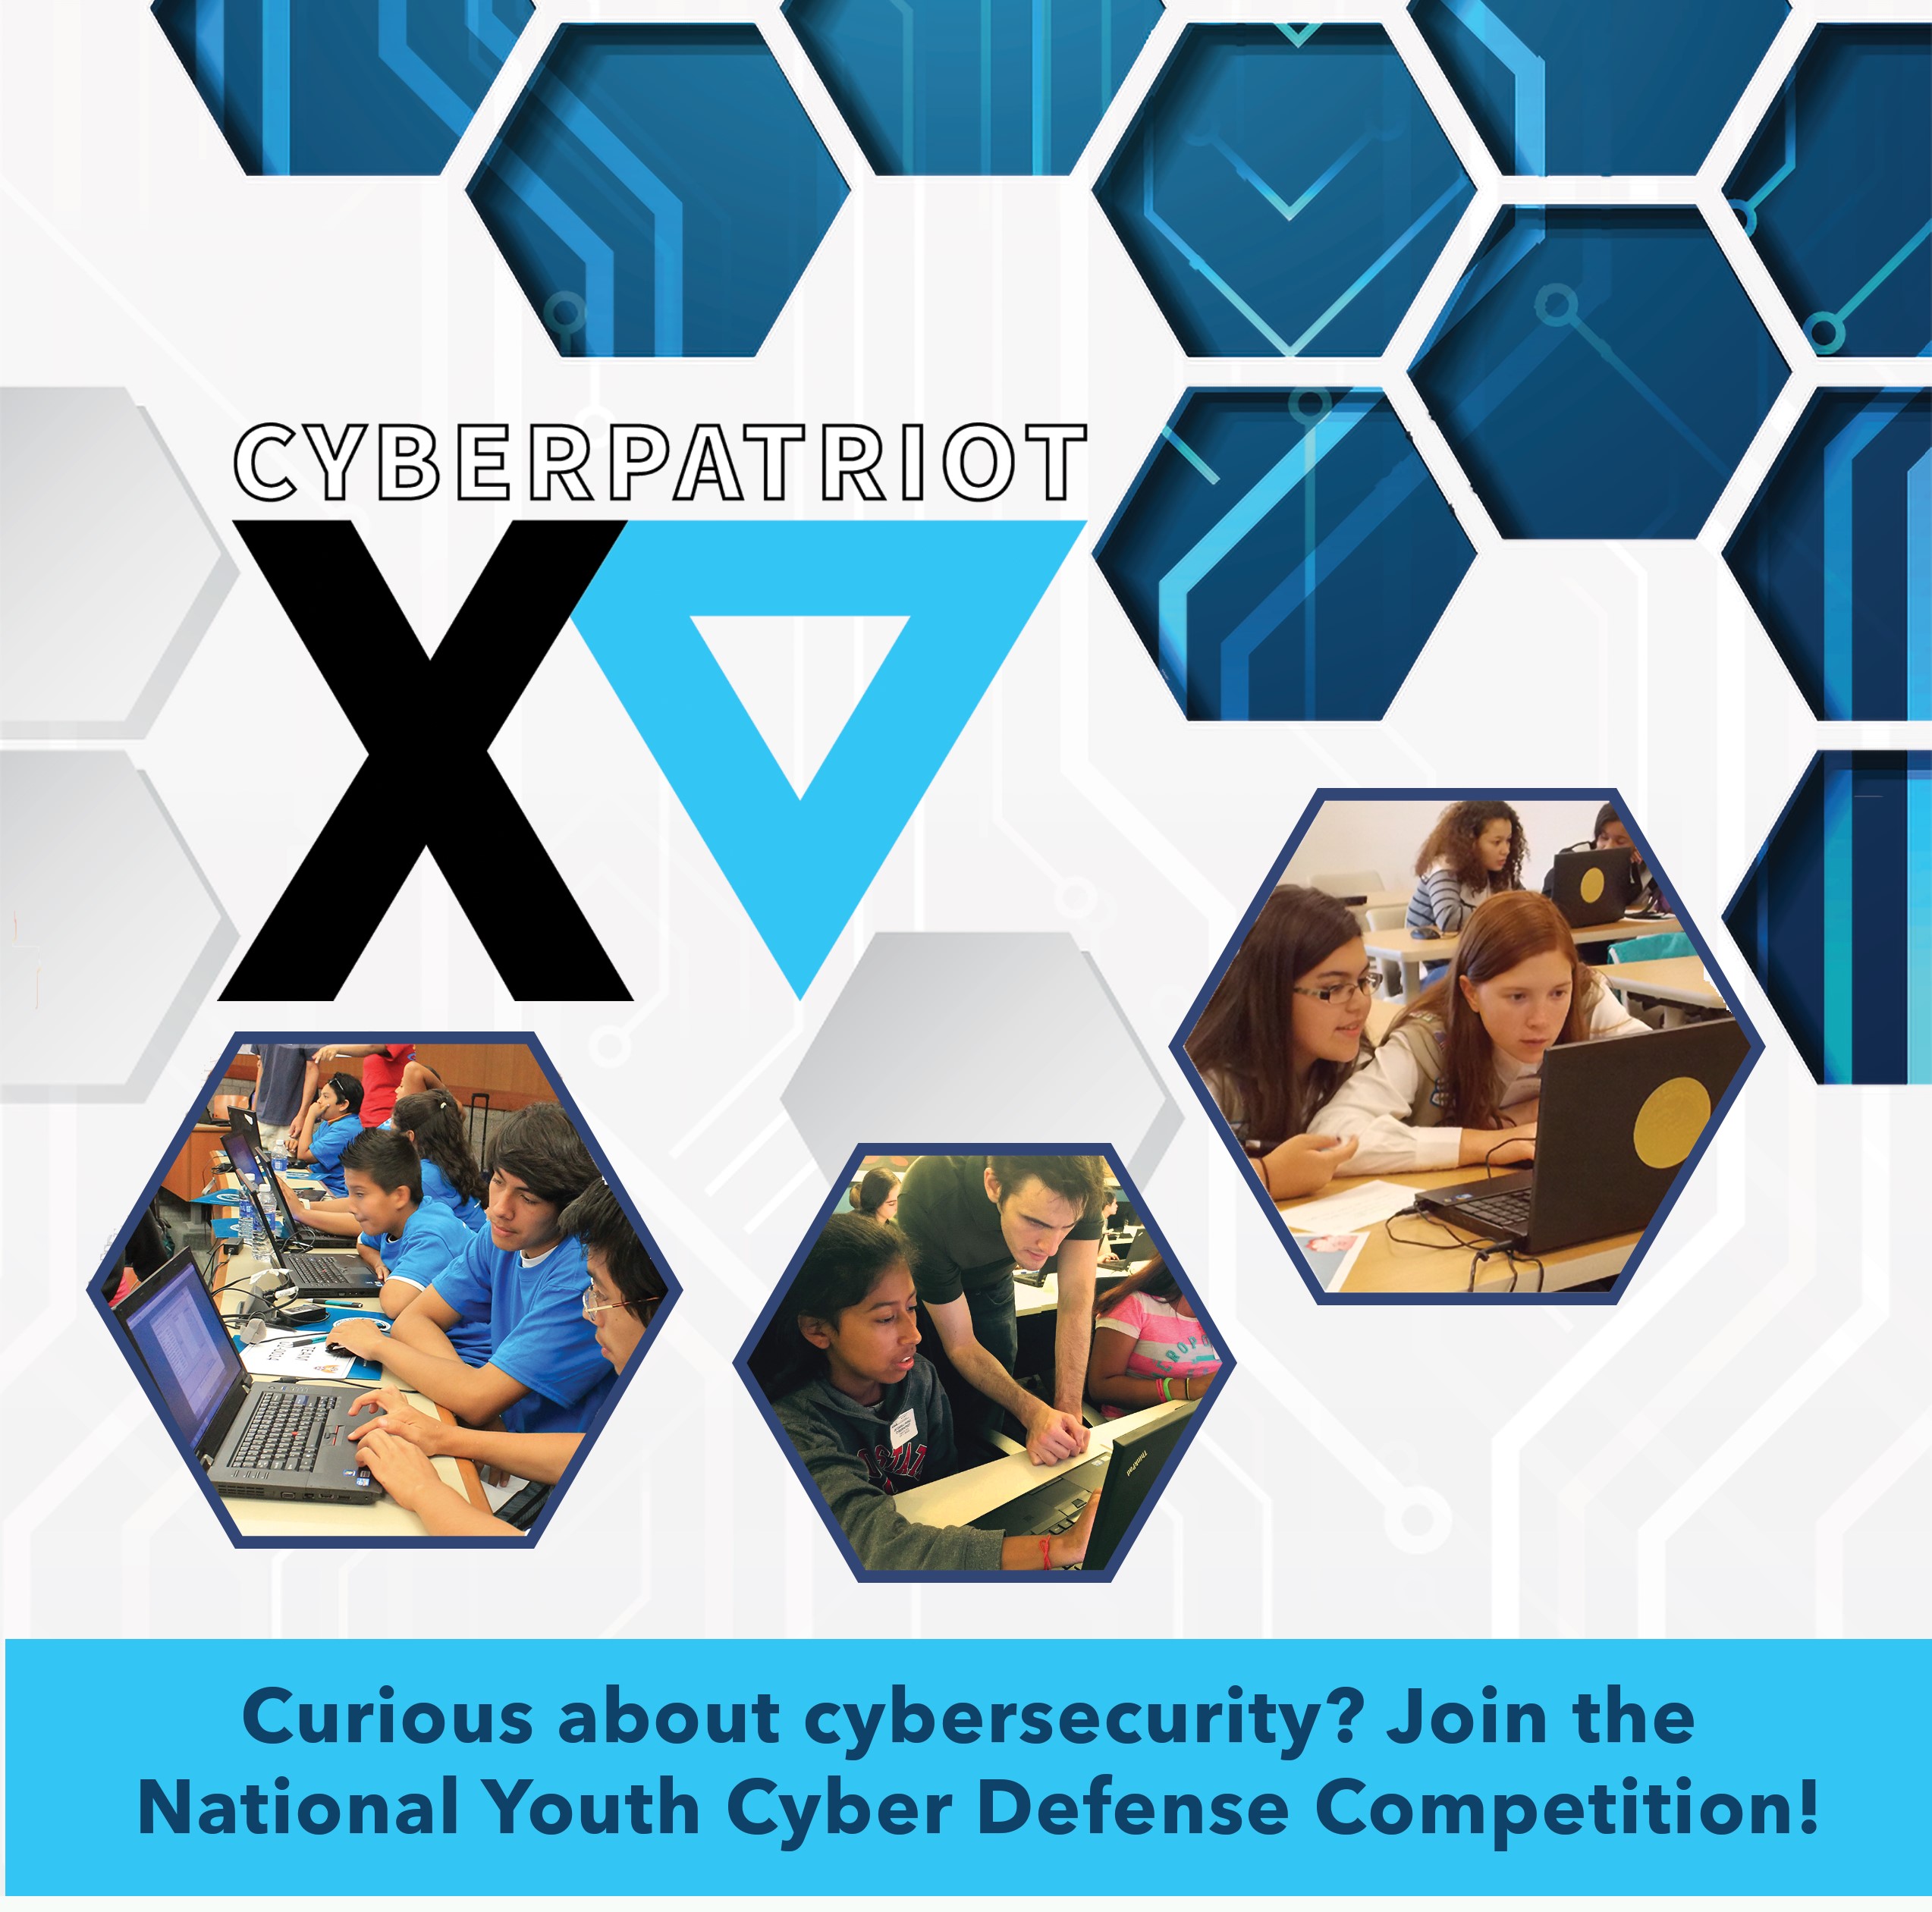 Cyberpatriot. Curious about cybersecurity? Join the National Youth Cyber Defense Competition!